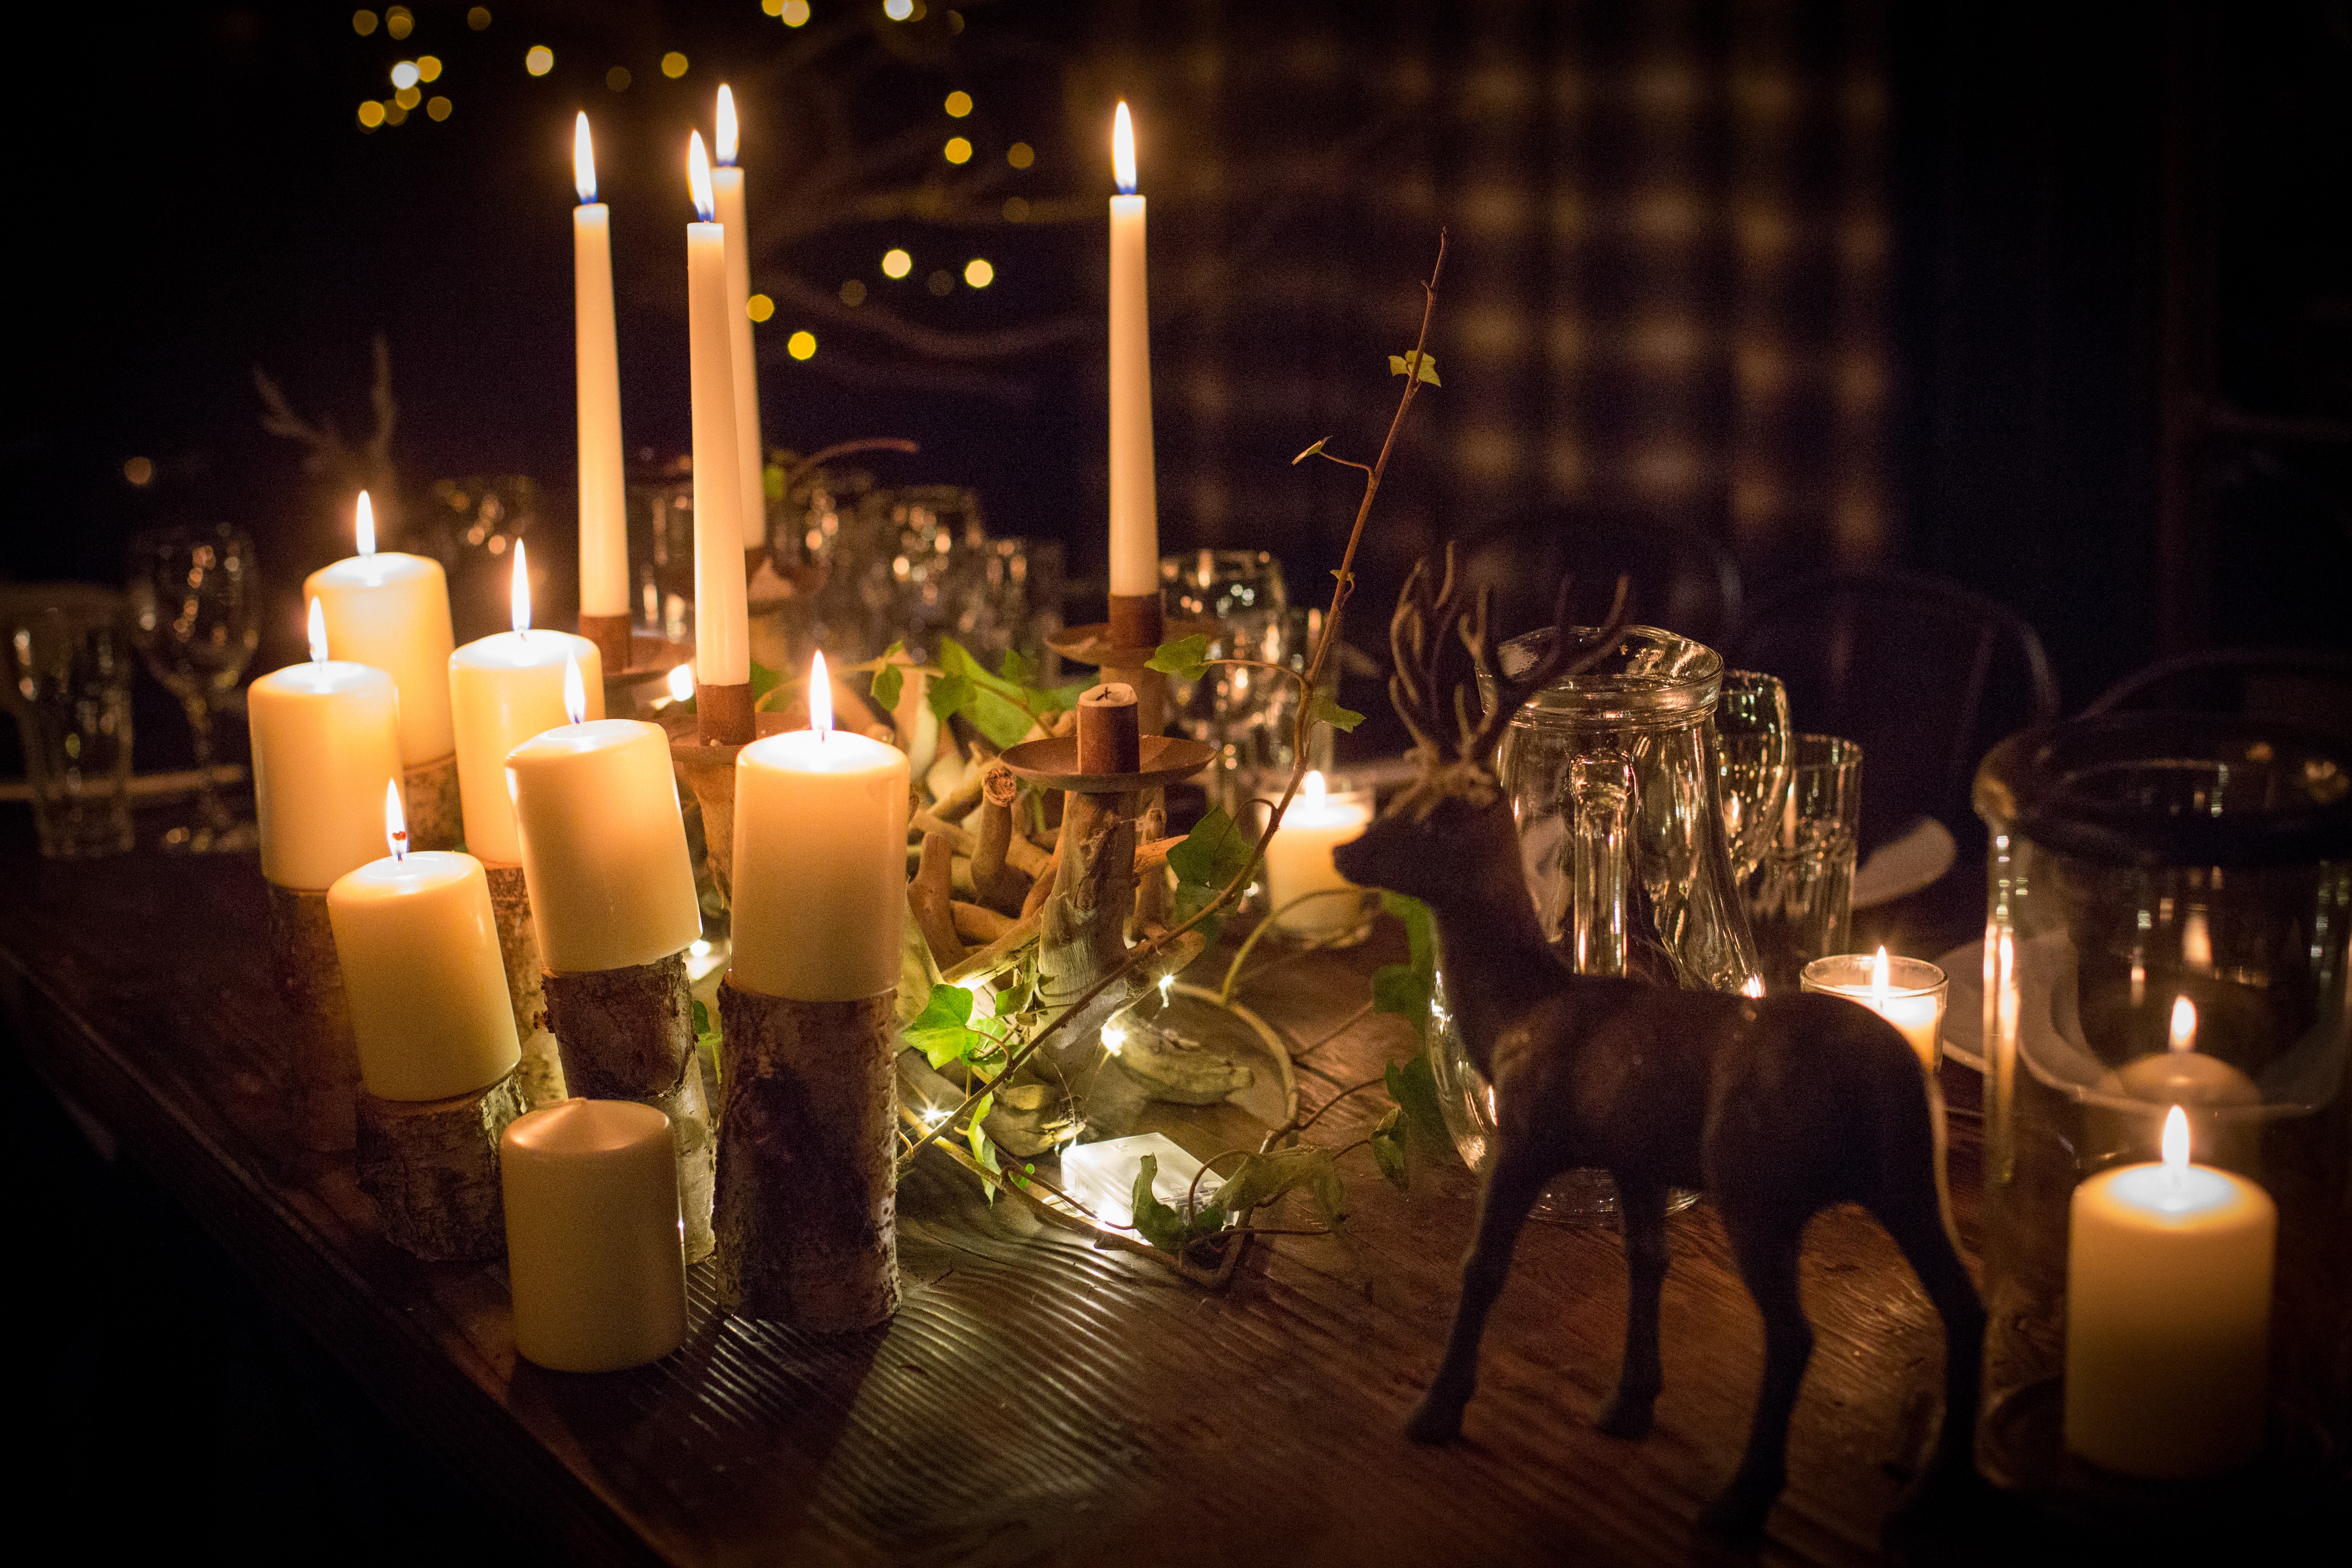 A table decorated with candles and ornaments